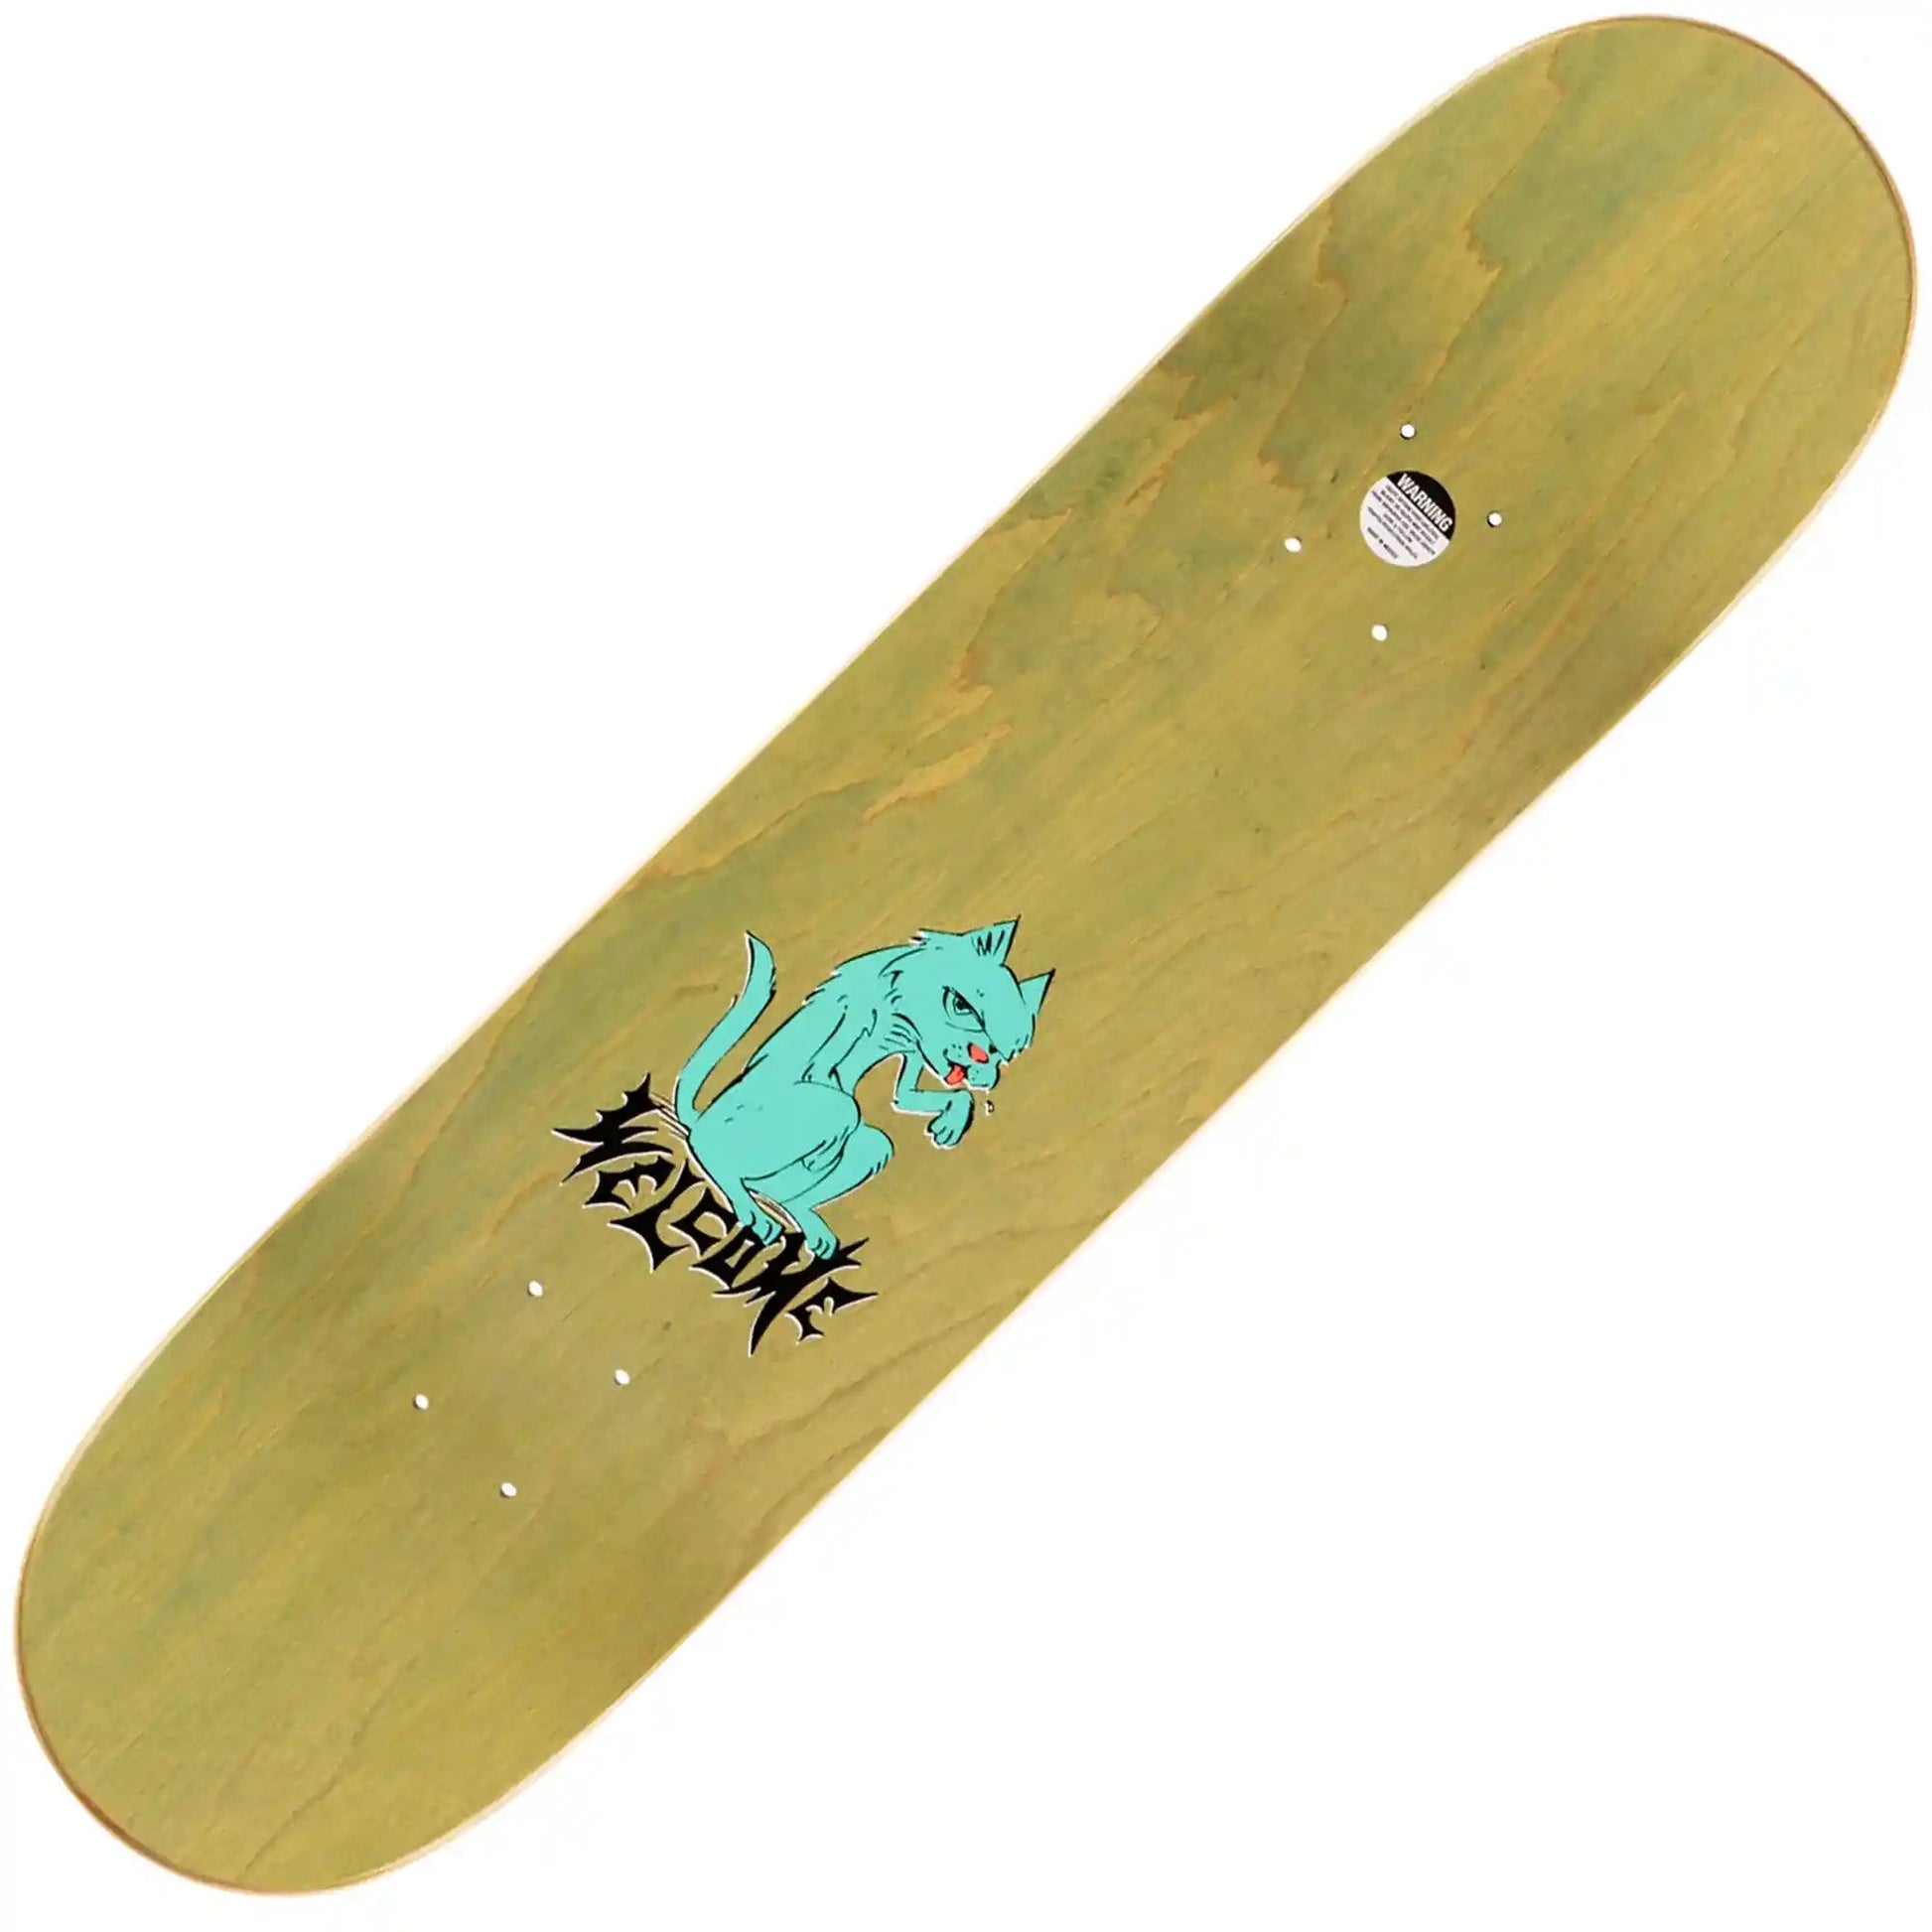 Welcome Purr Pile Nora Pro Model Deck (7.75"), purple stain - Tiki Room Skateboards - 3